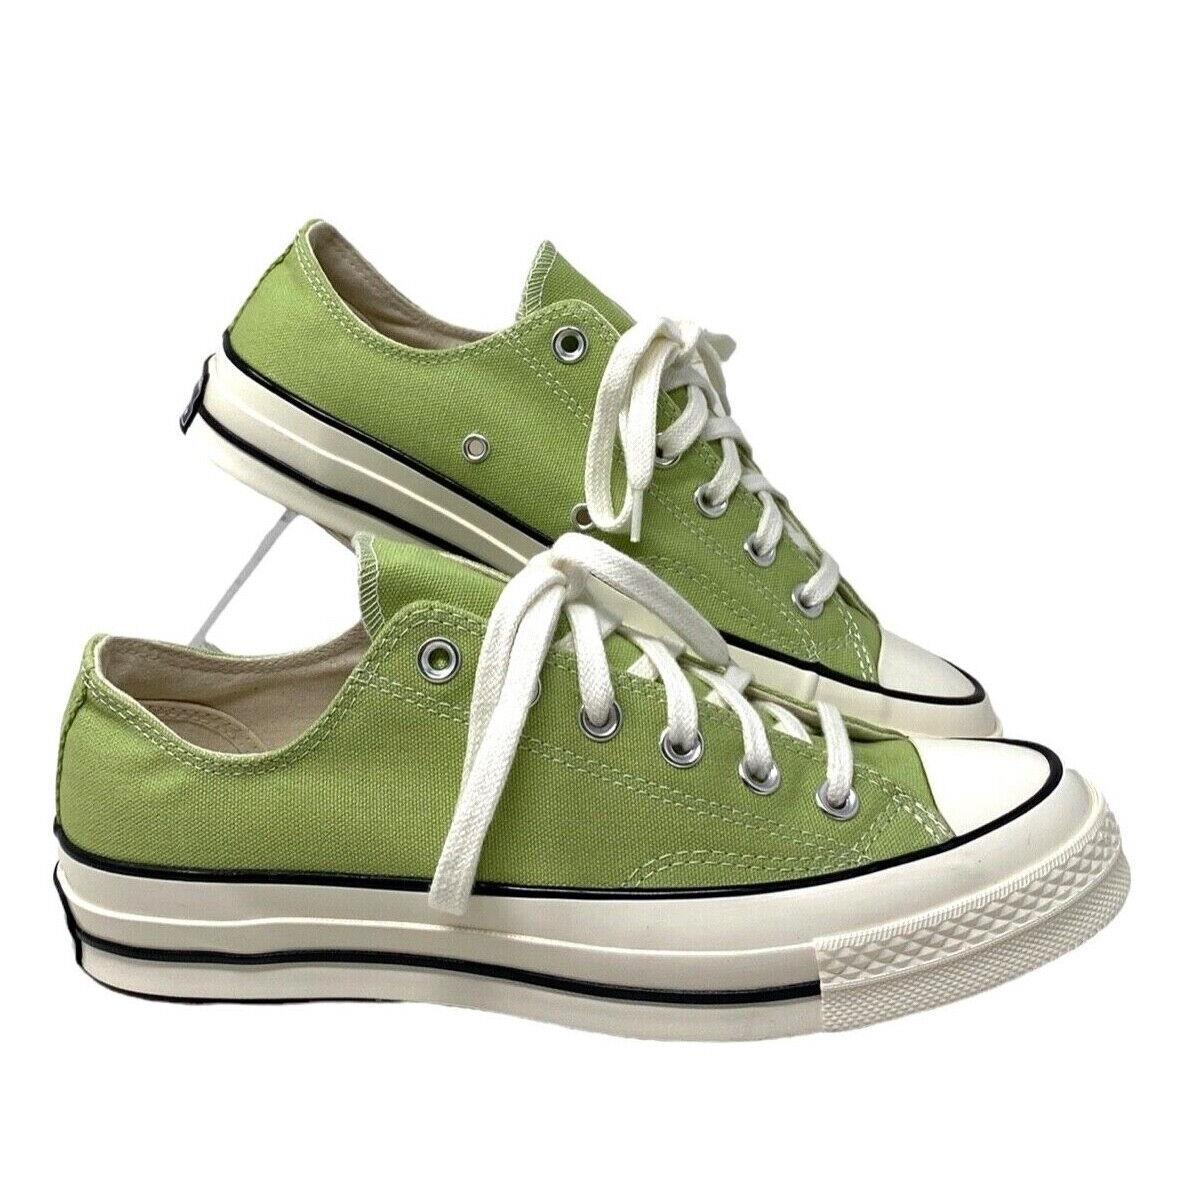 Converse Chuck 70 Low Top Shoes Green Canvas Women`s Size Skate Sneakers A04587C